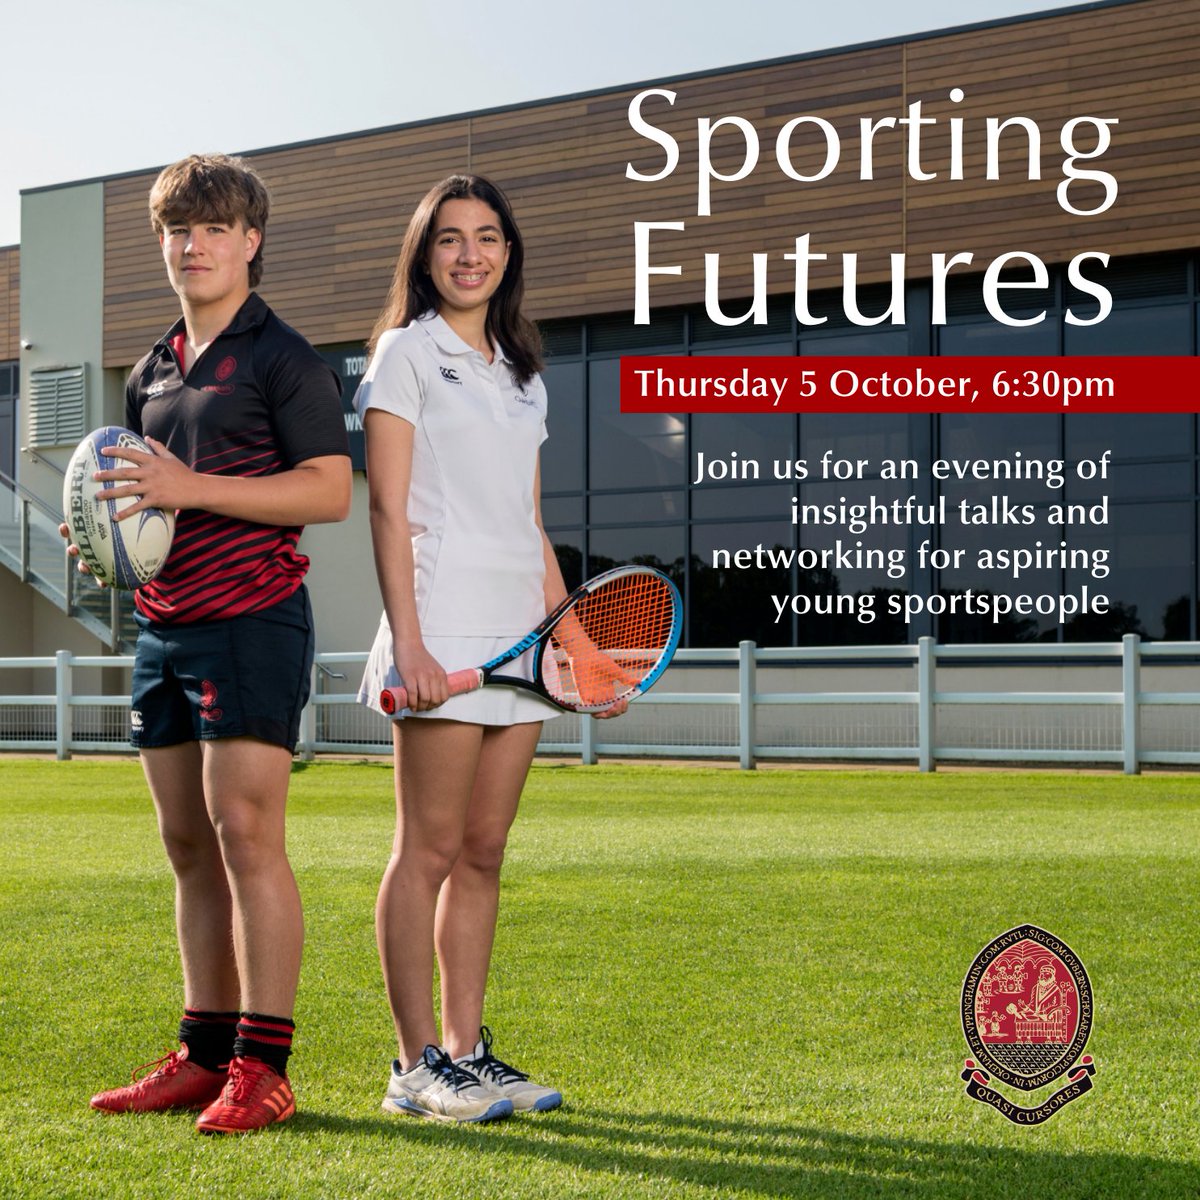 We're hosting an evening of presentations and networking aimed at athletes from any sport who are involved in talent pathways or academies. Sporting Futures will be held at 6:30pm on Thursday 5 October and is open to 13 to 16-year-olds and their parents. oakham.rutland.sch.uk/news/sporting-…